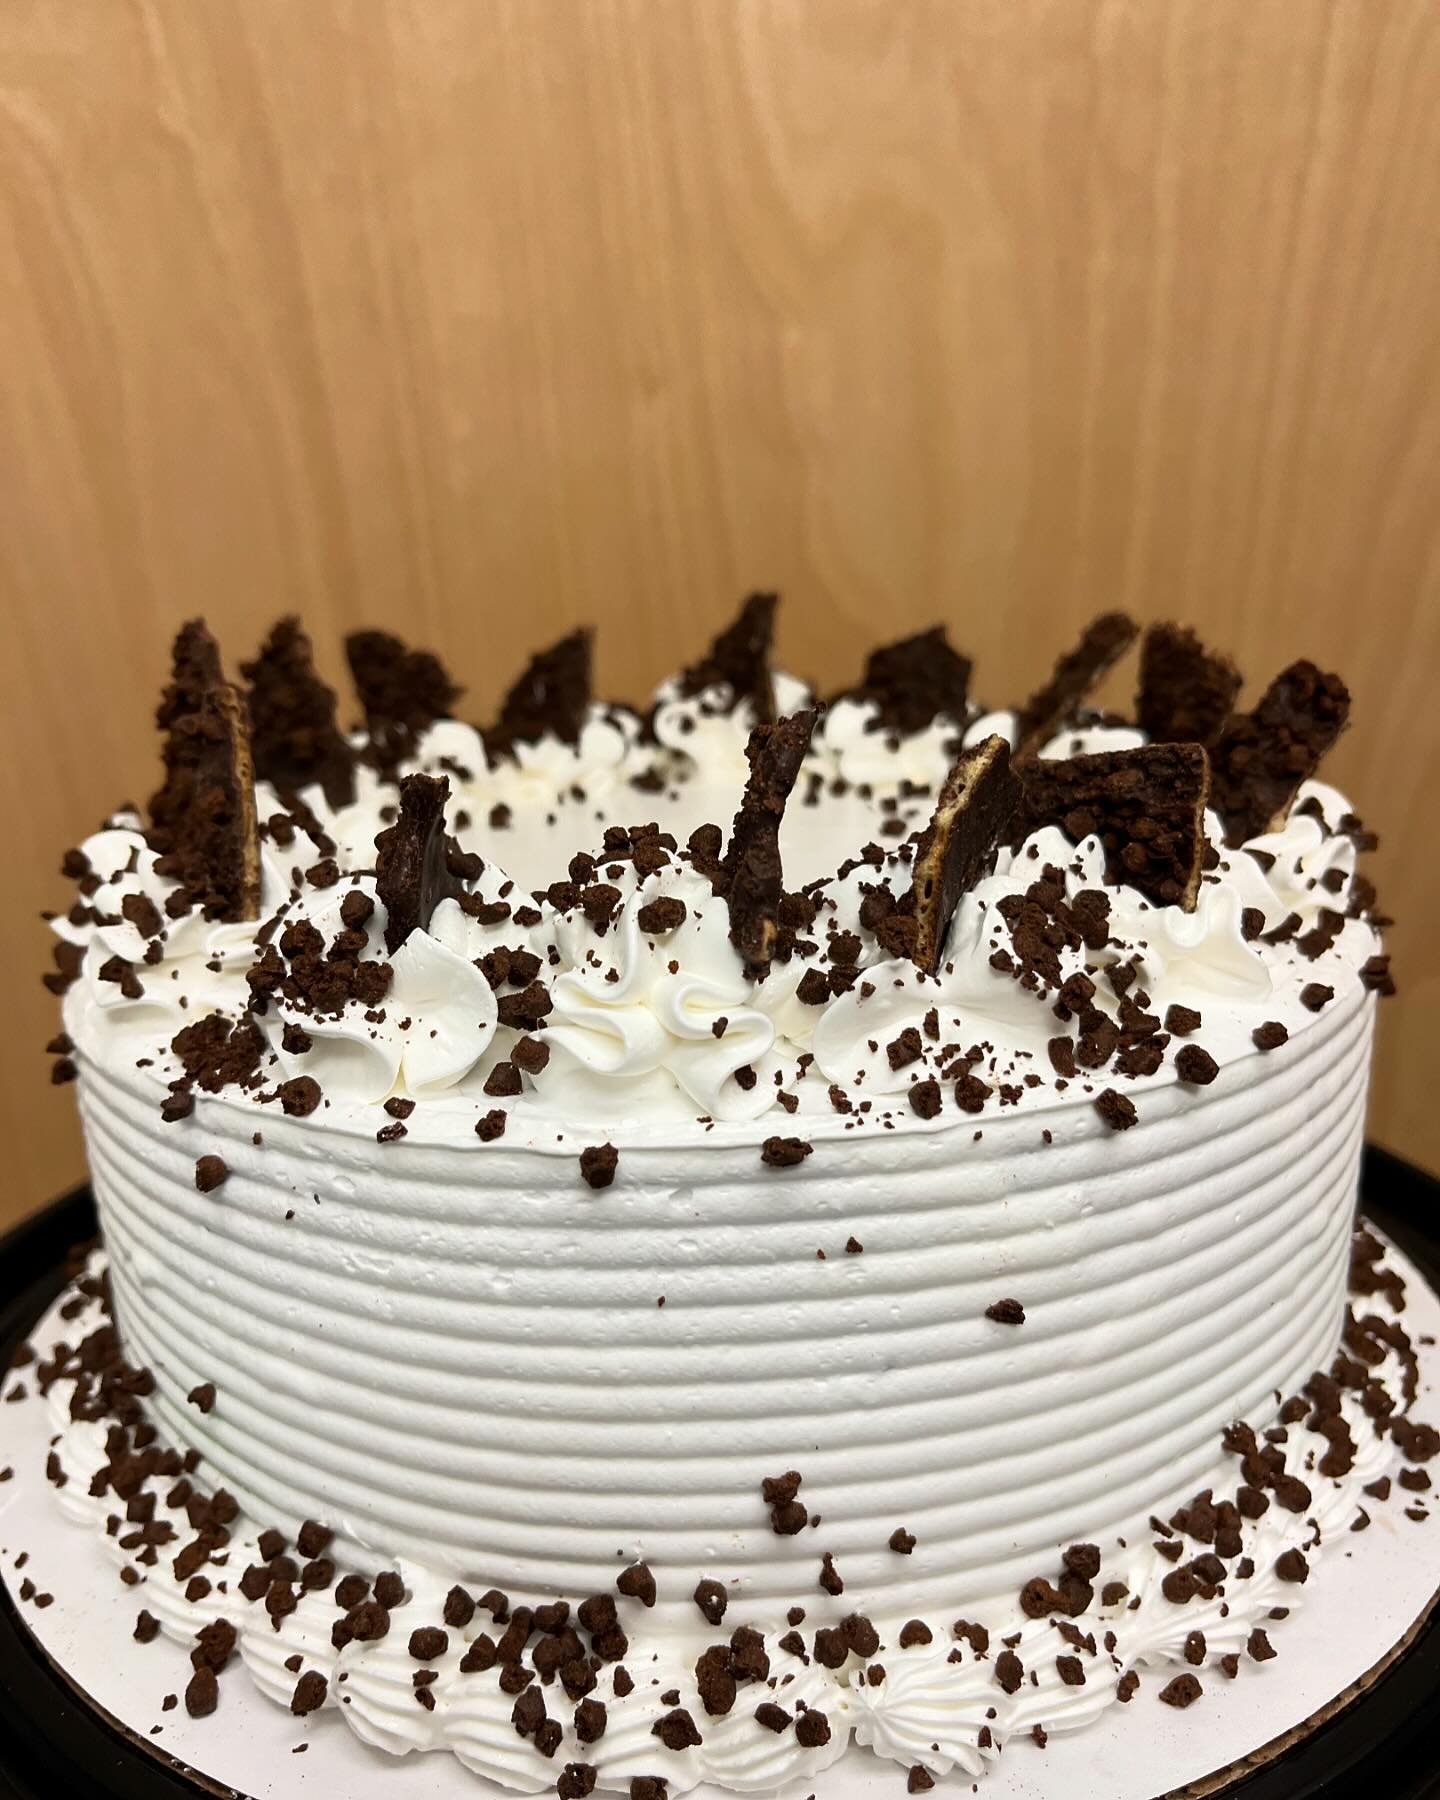 Forgot to order an ICE CREAM CAKE for your celebration? No worries, we&rsquo;ve got you covered! We&rsquo;re stocked up on cakes in our grab &lsquo;n go freezer. We&rsquo;ve got plenty of pies, sandwiches, sliders, and cake cups too!
⠀⠀⠀⠀⠀⠀⠀⠀⠀⠀⠀⠀⠀⠀⠀⠀